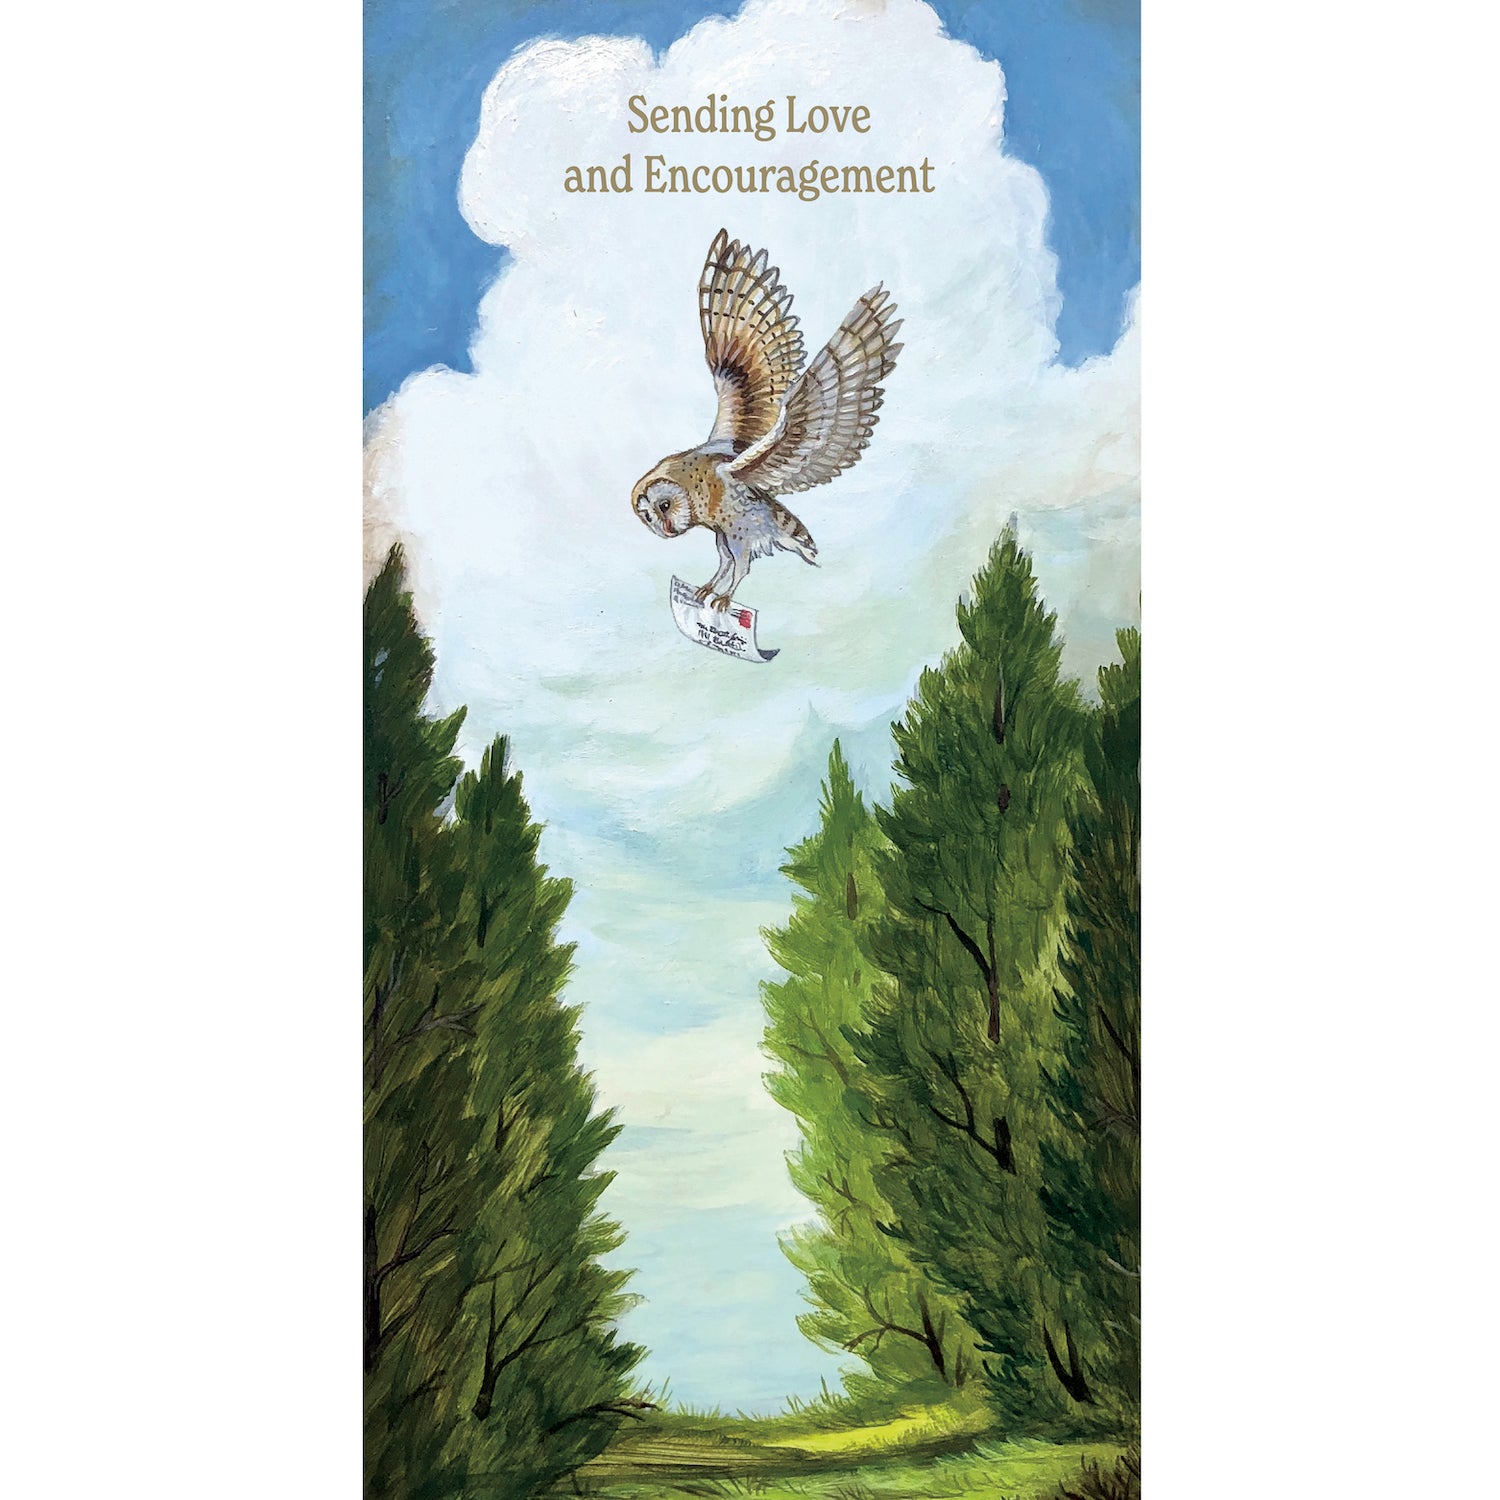 A whimsical image of the Hester &amp; Cook Owl Carrier Card gracefully flying over trees.